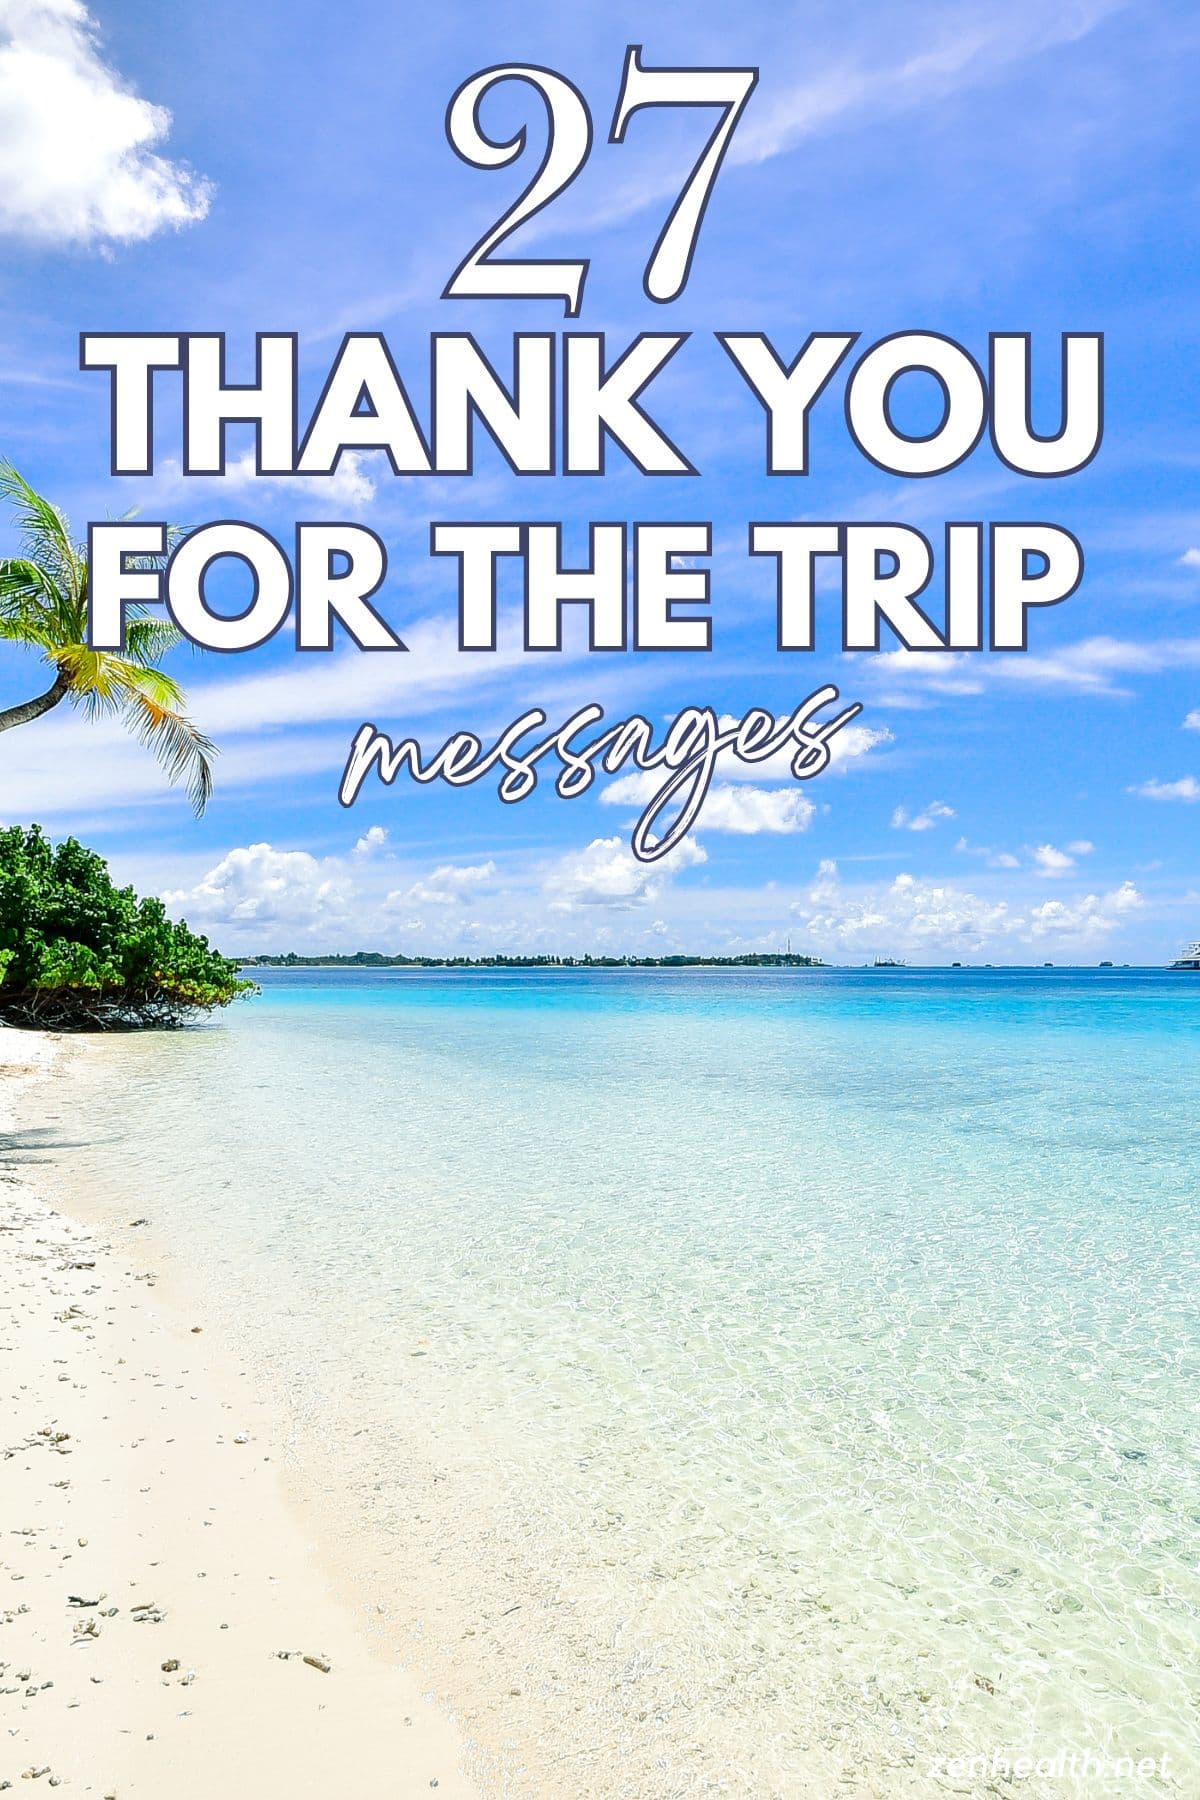 27 thank you for the trip messages text overlay on a photo of a beautiful beach with trees on the left side